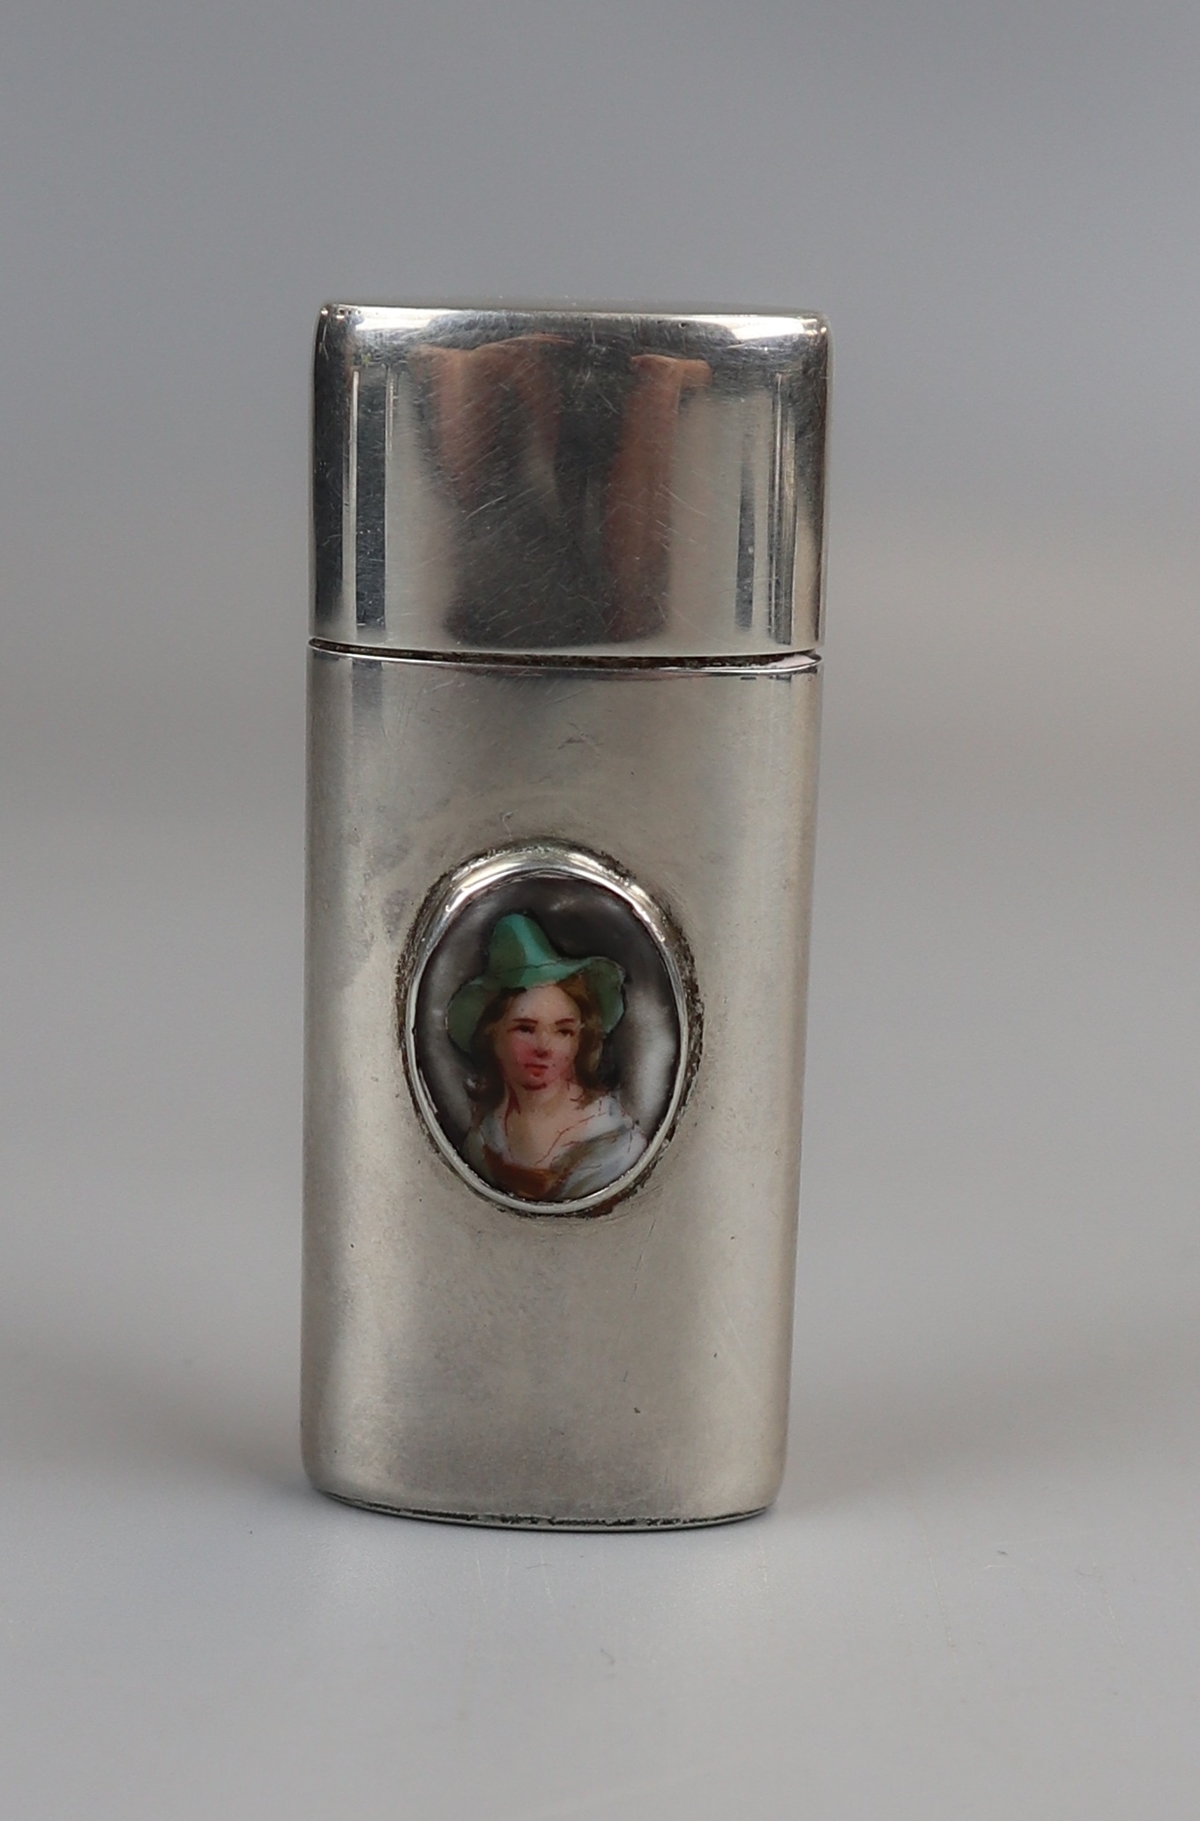 Hallmarked silver pin case with enamel portrait of lady - Makers mark G&S Co LTD